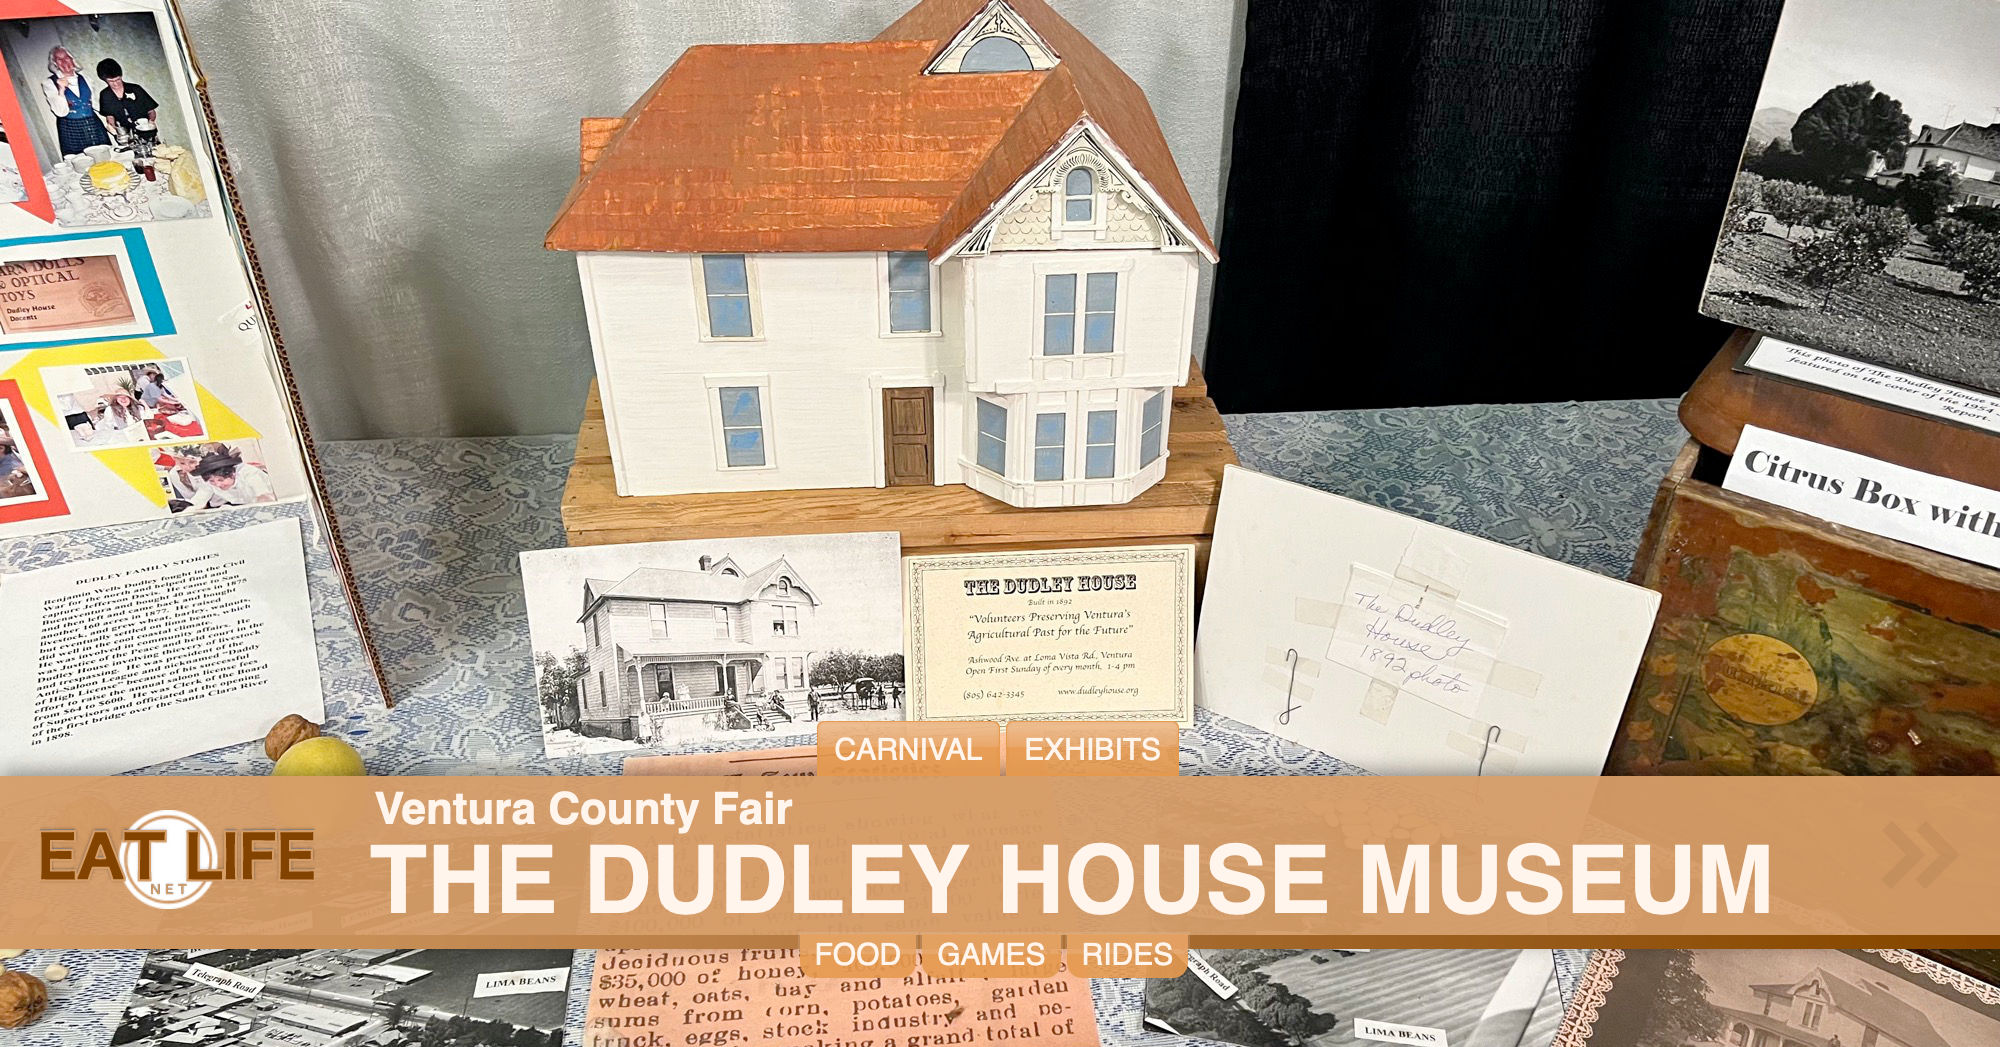 The Dudley House Museum